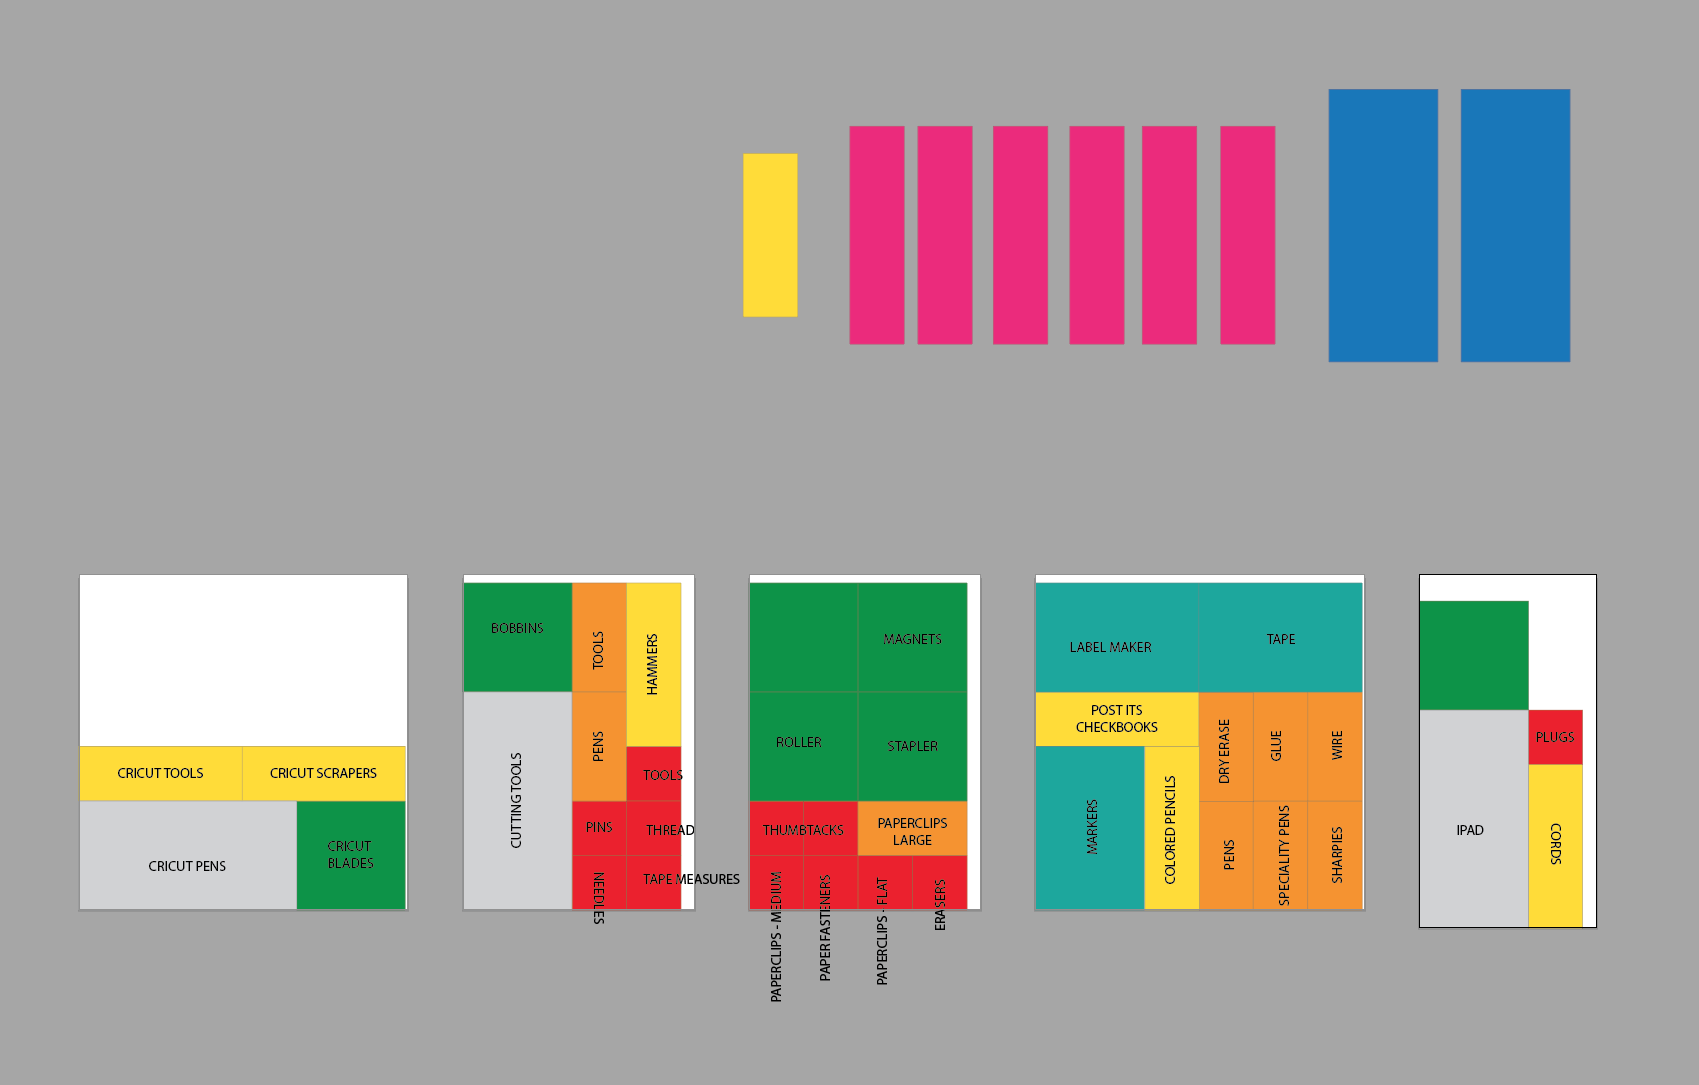 A digital mock-up with colored and white boxes to signify drawer organization